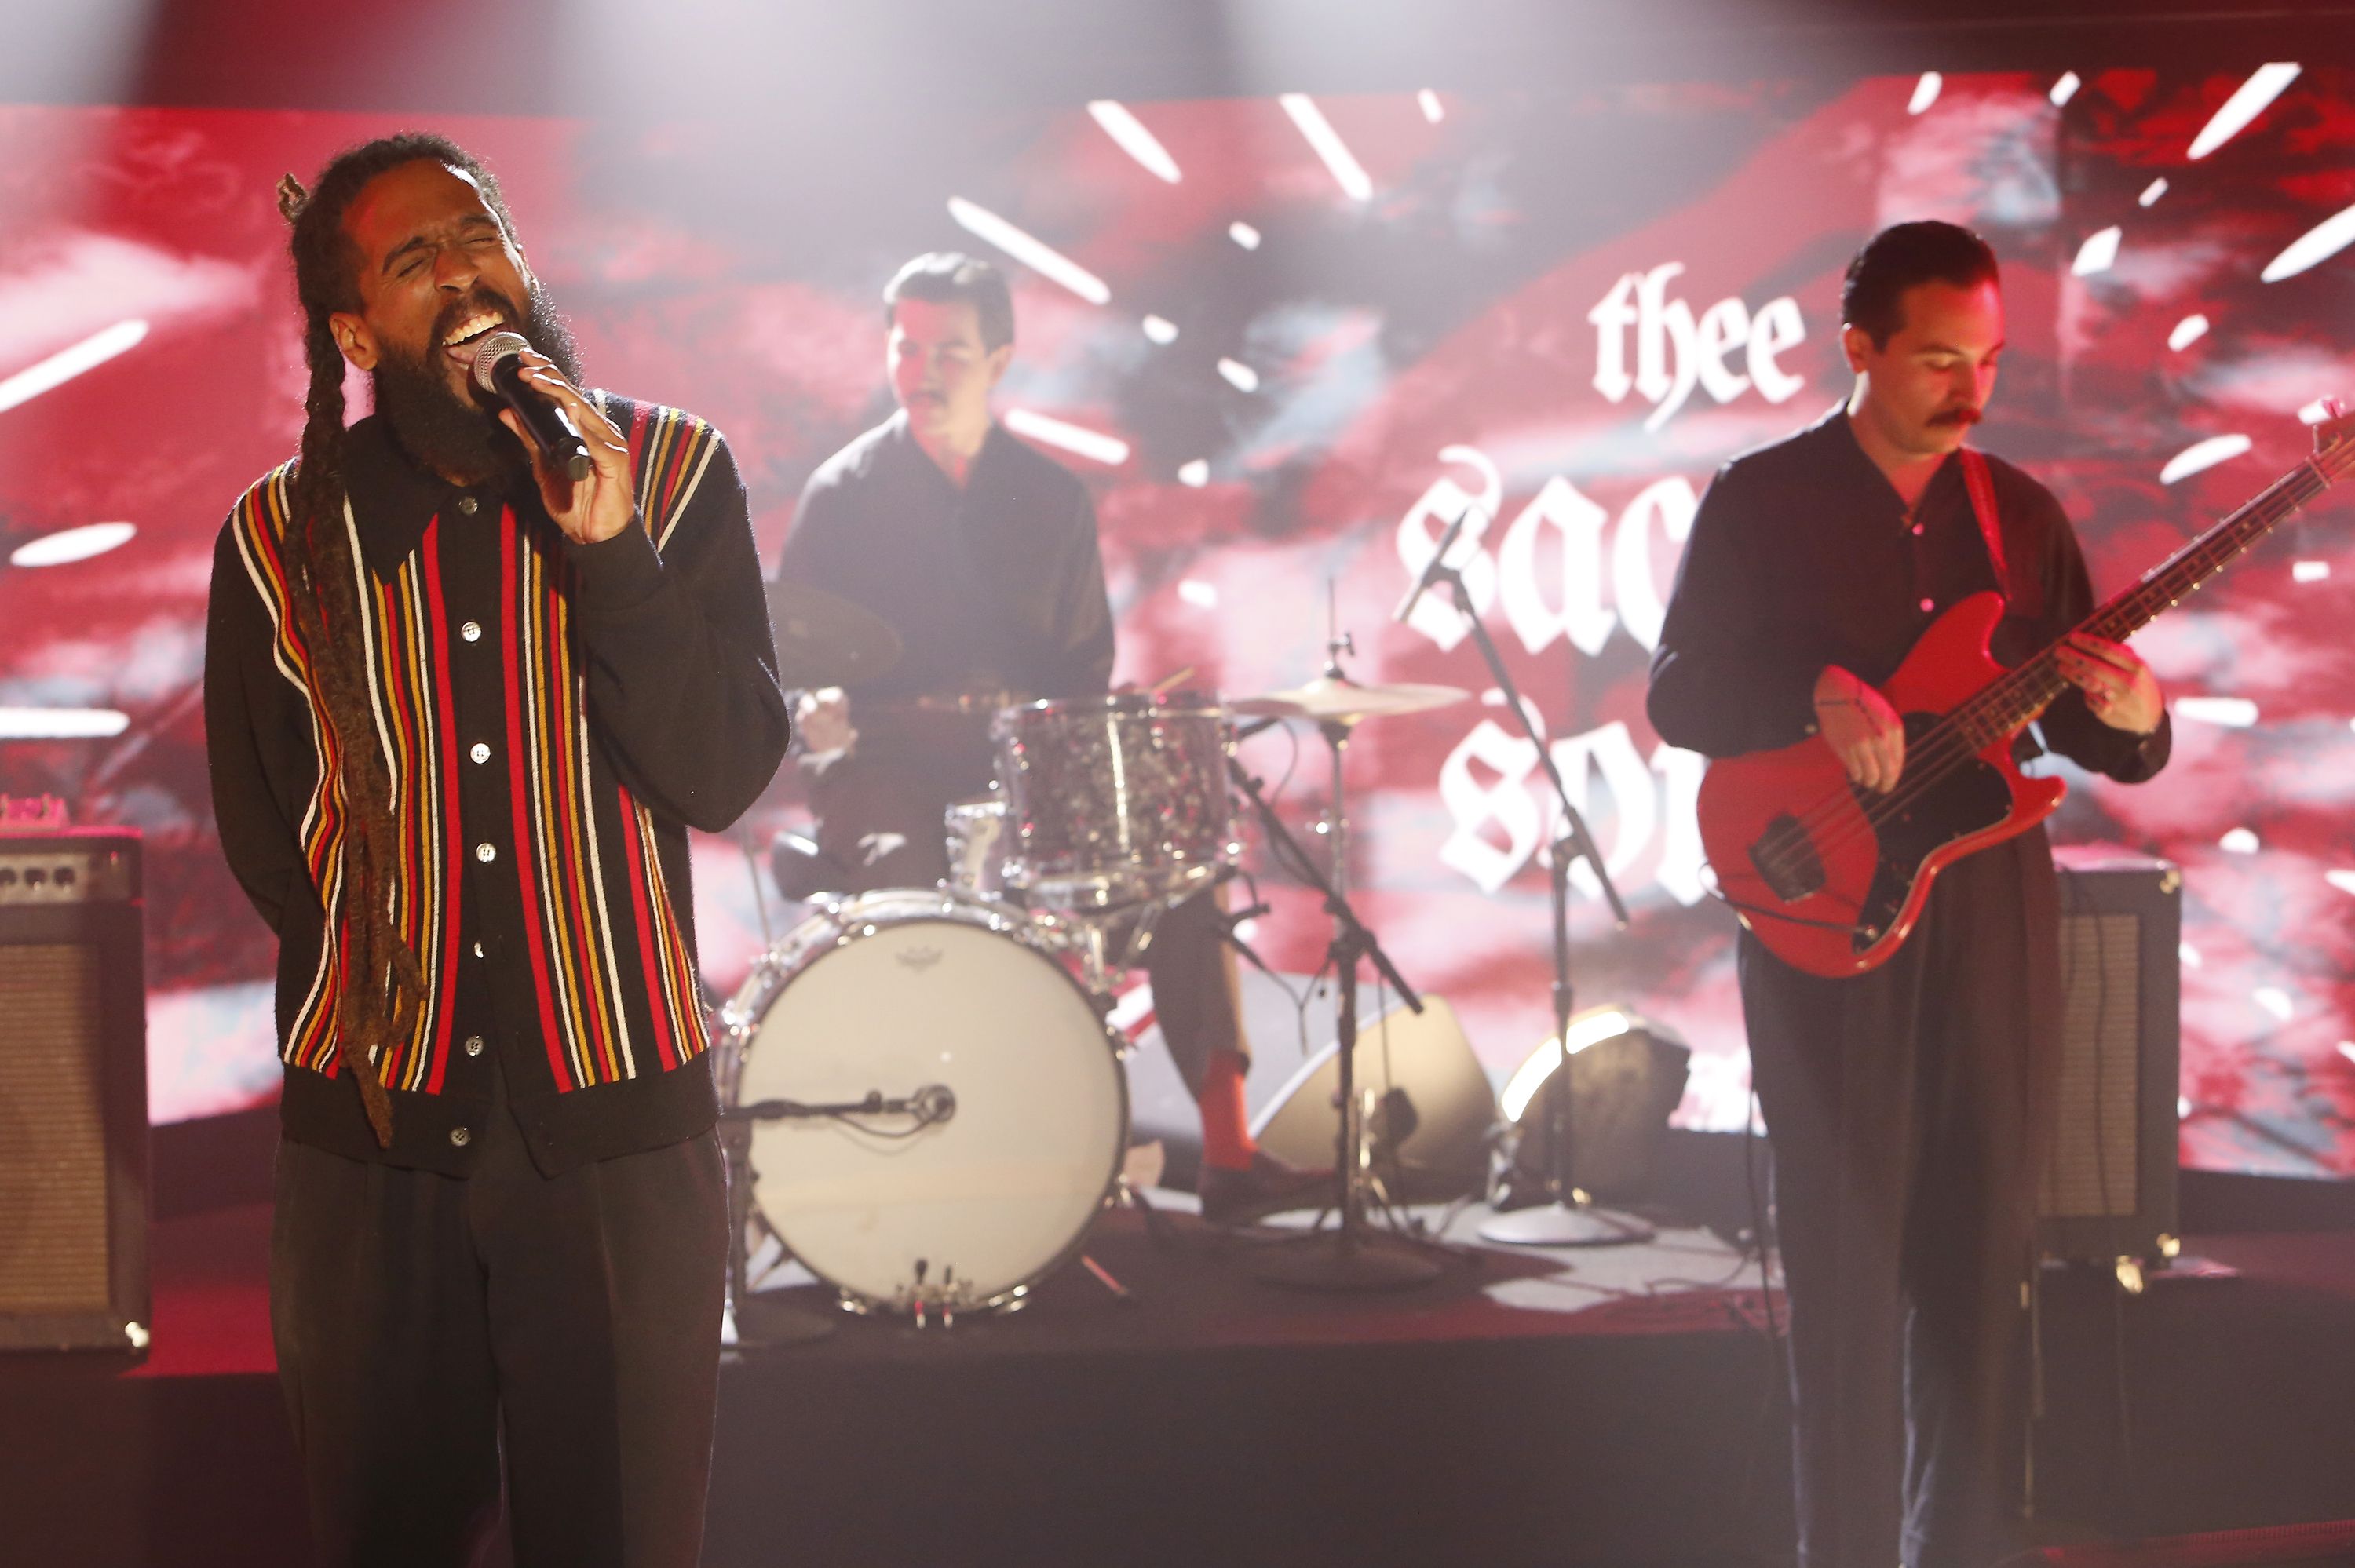 Performed by Thee Sacred Souls "Jimmy Kimmel Live!" 